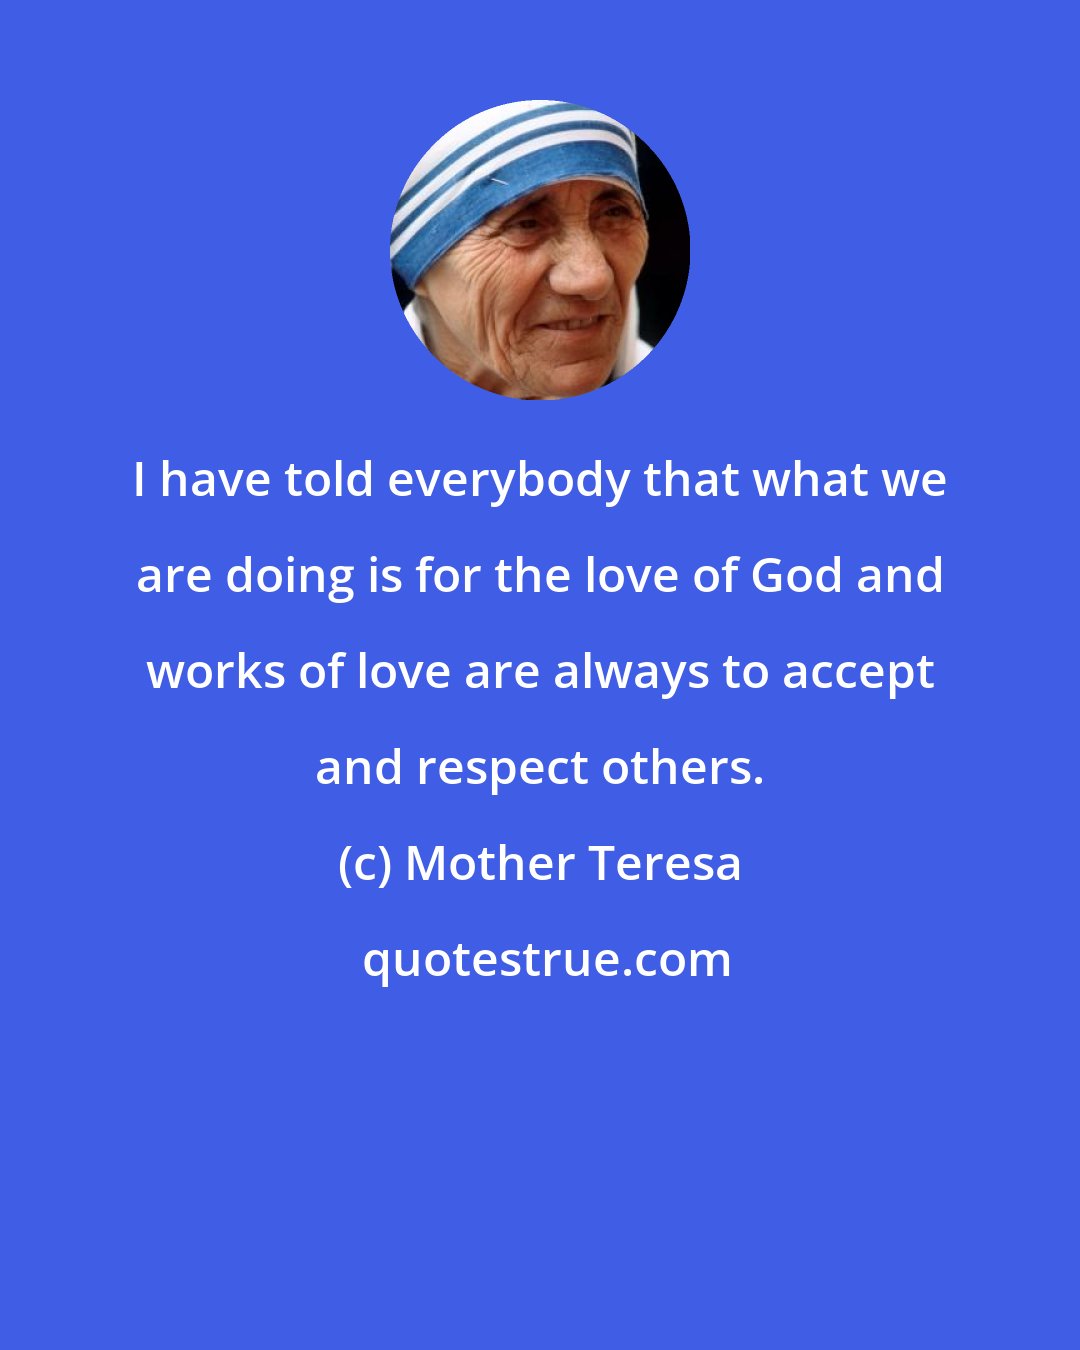 Mother Teresa: I have told everybody that what we are doing is for the love of God and works of love are always to accept and respect others.